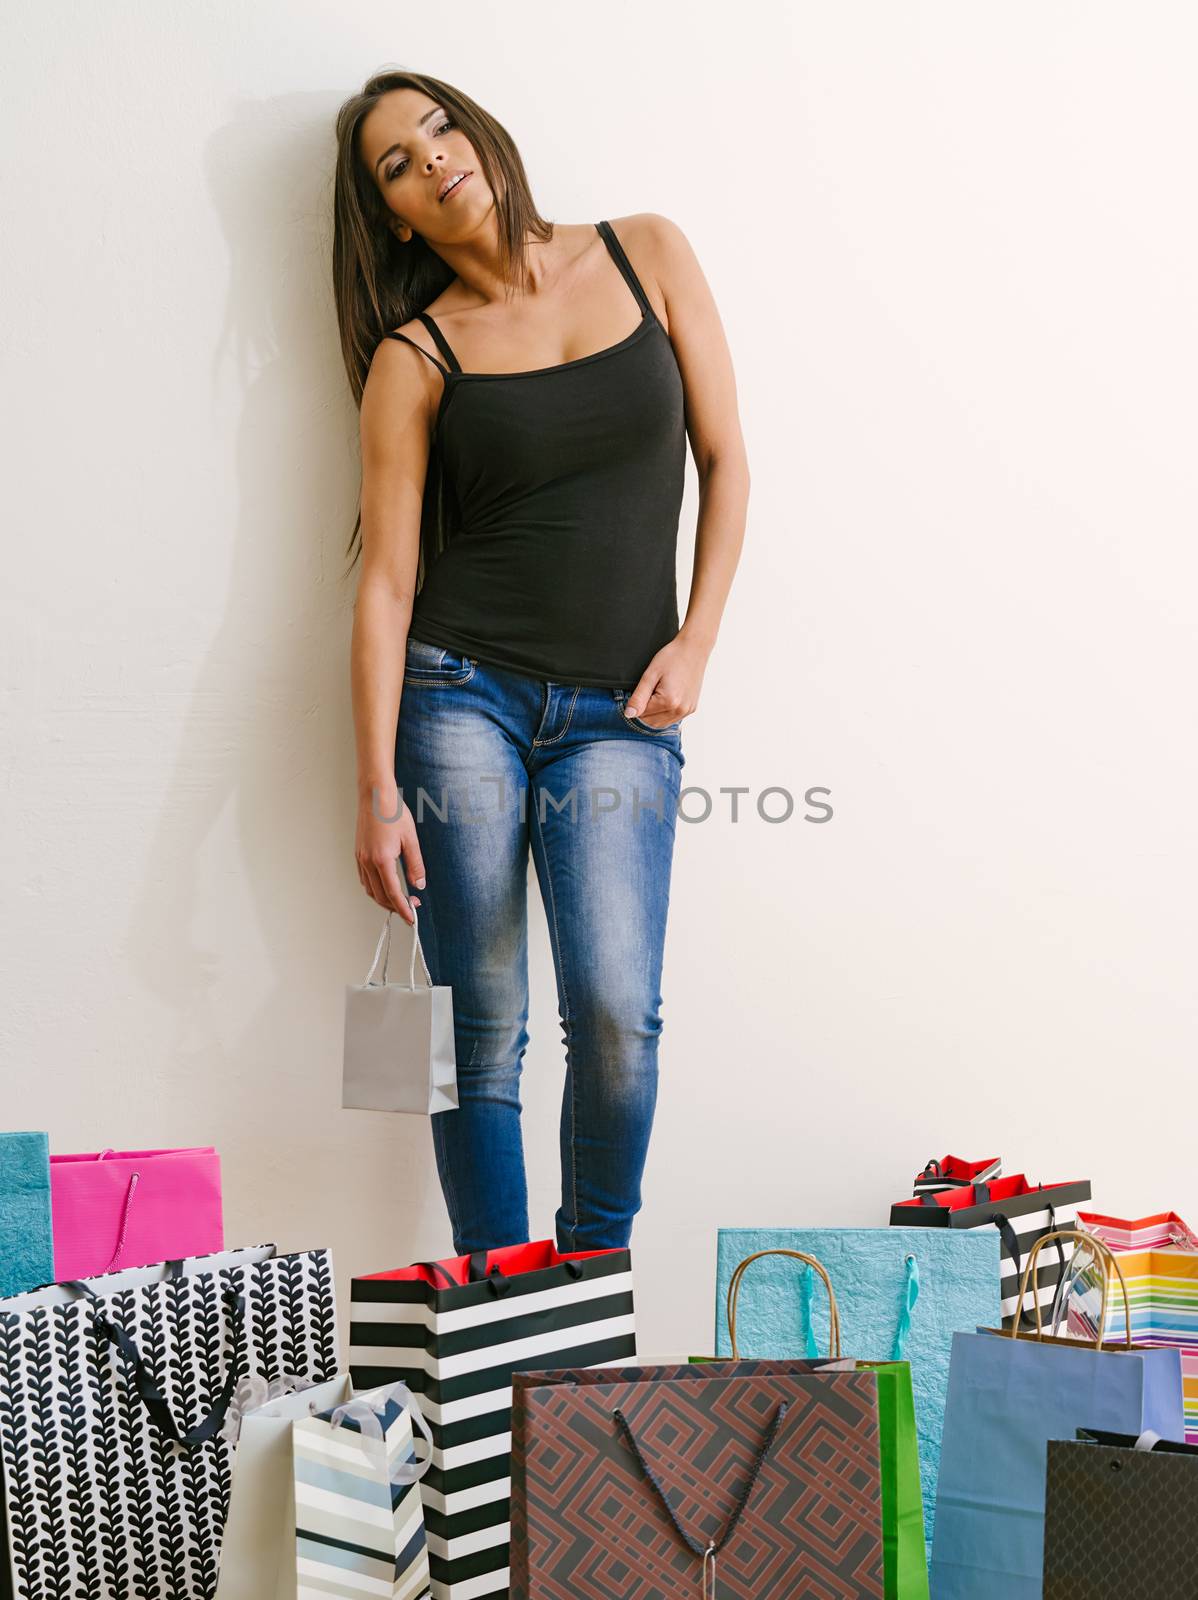 Tired woman standing around her shopping bags by sumners